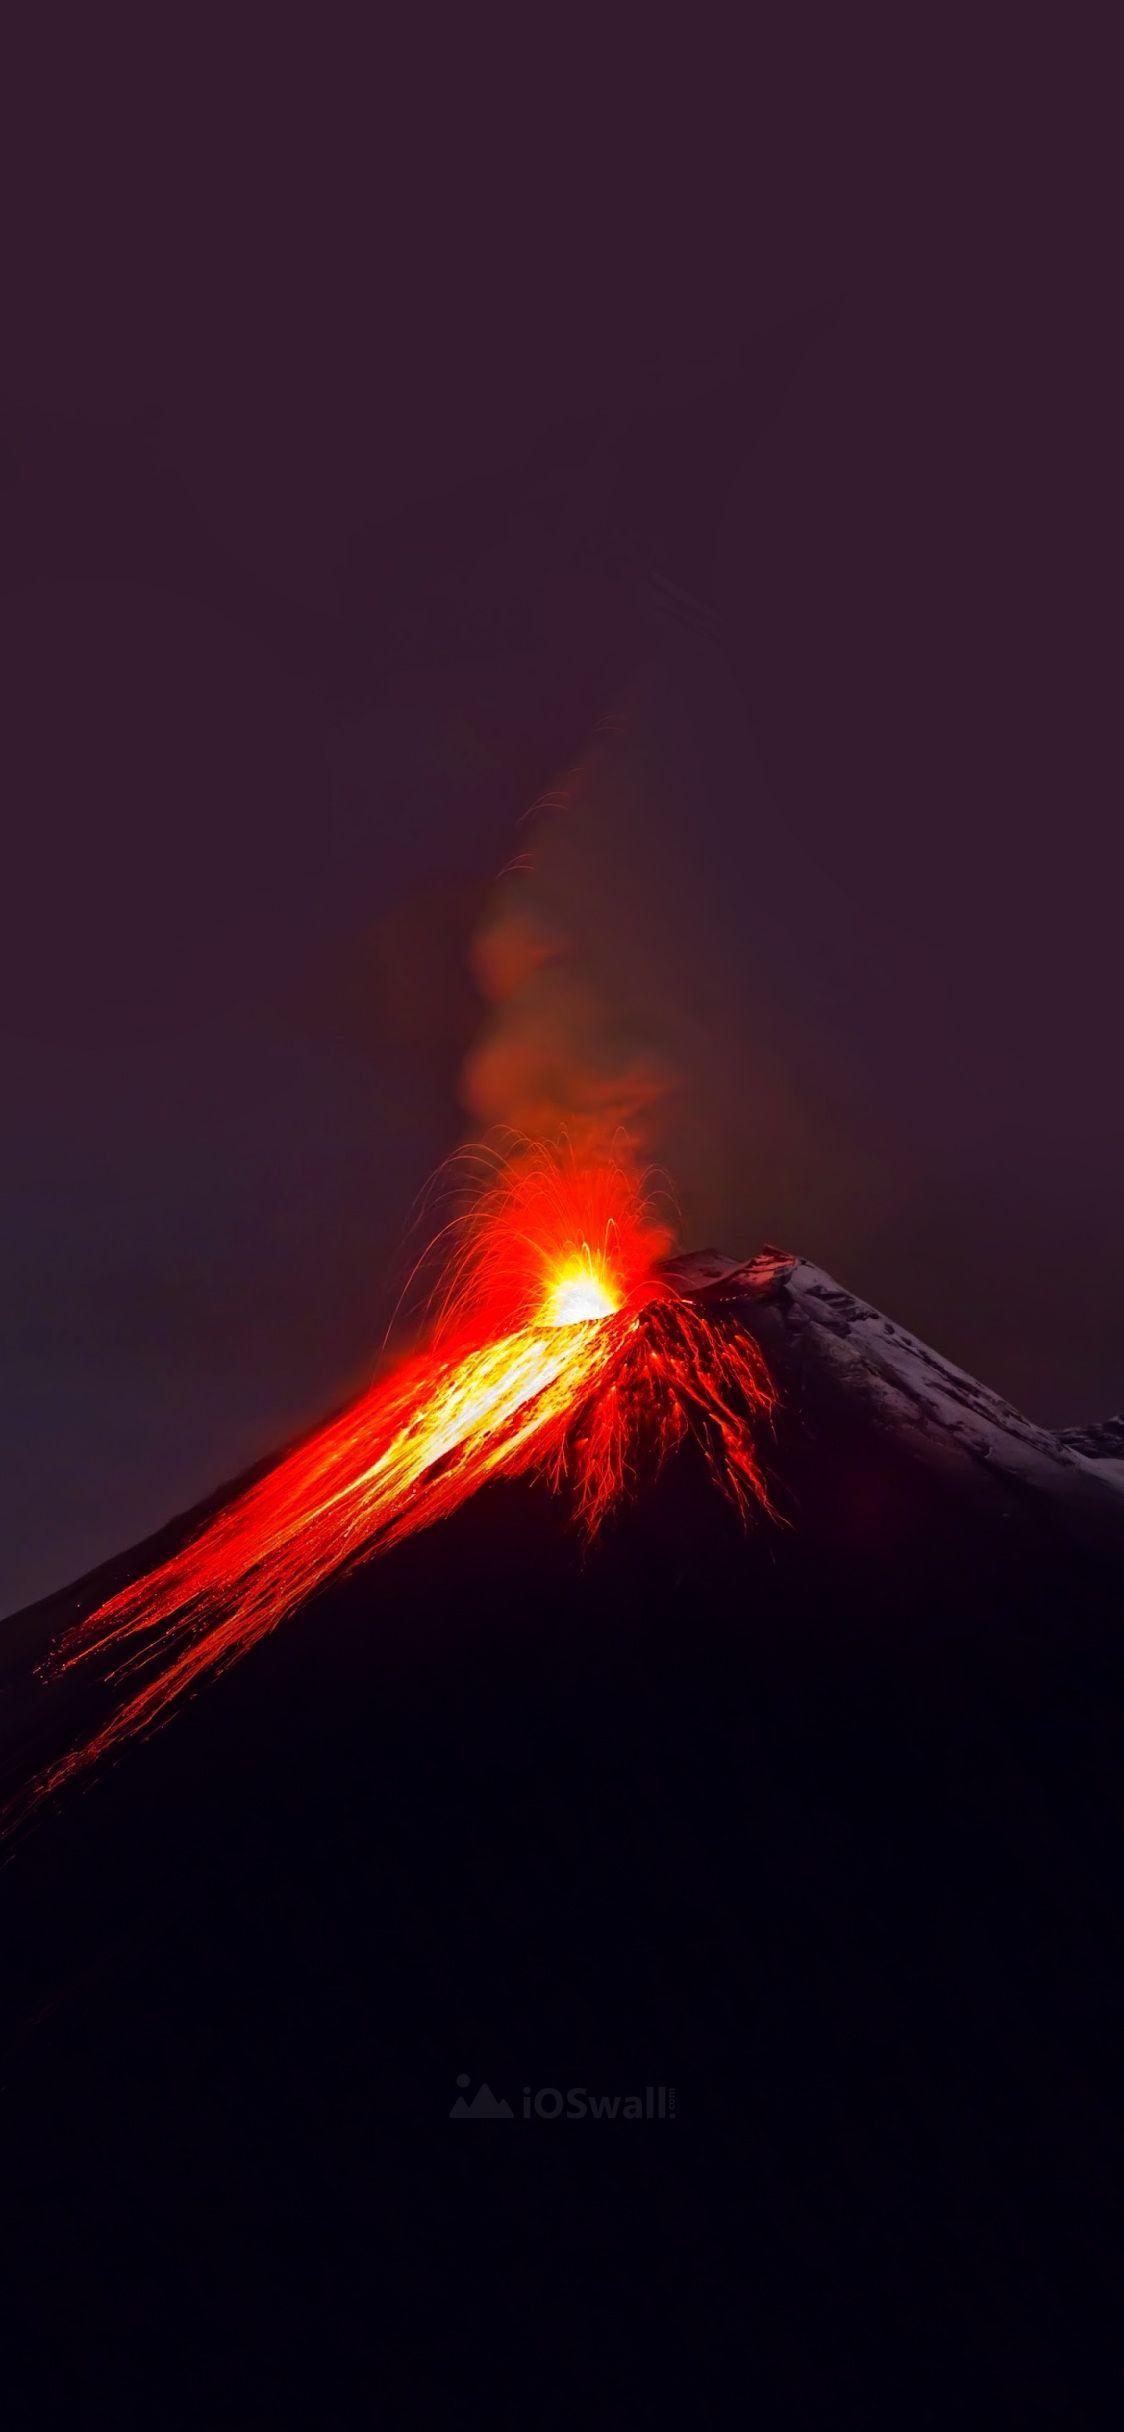 Red Dragon Erupts from Volcano 4K wallpaper download